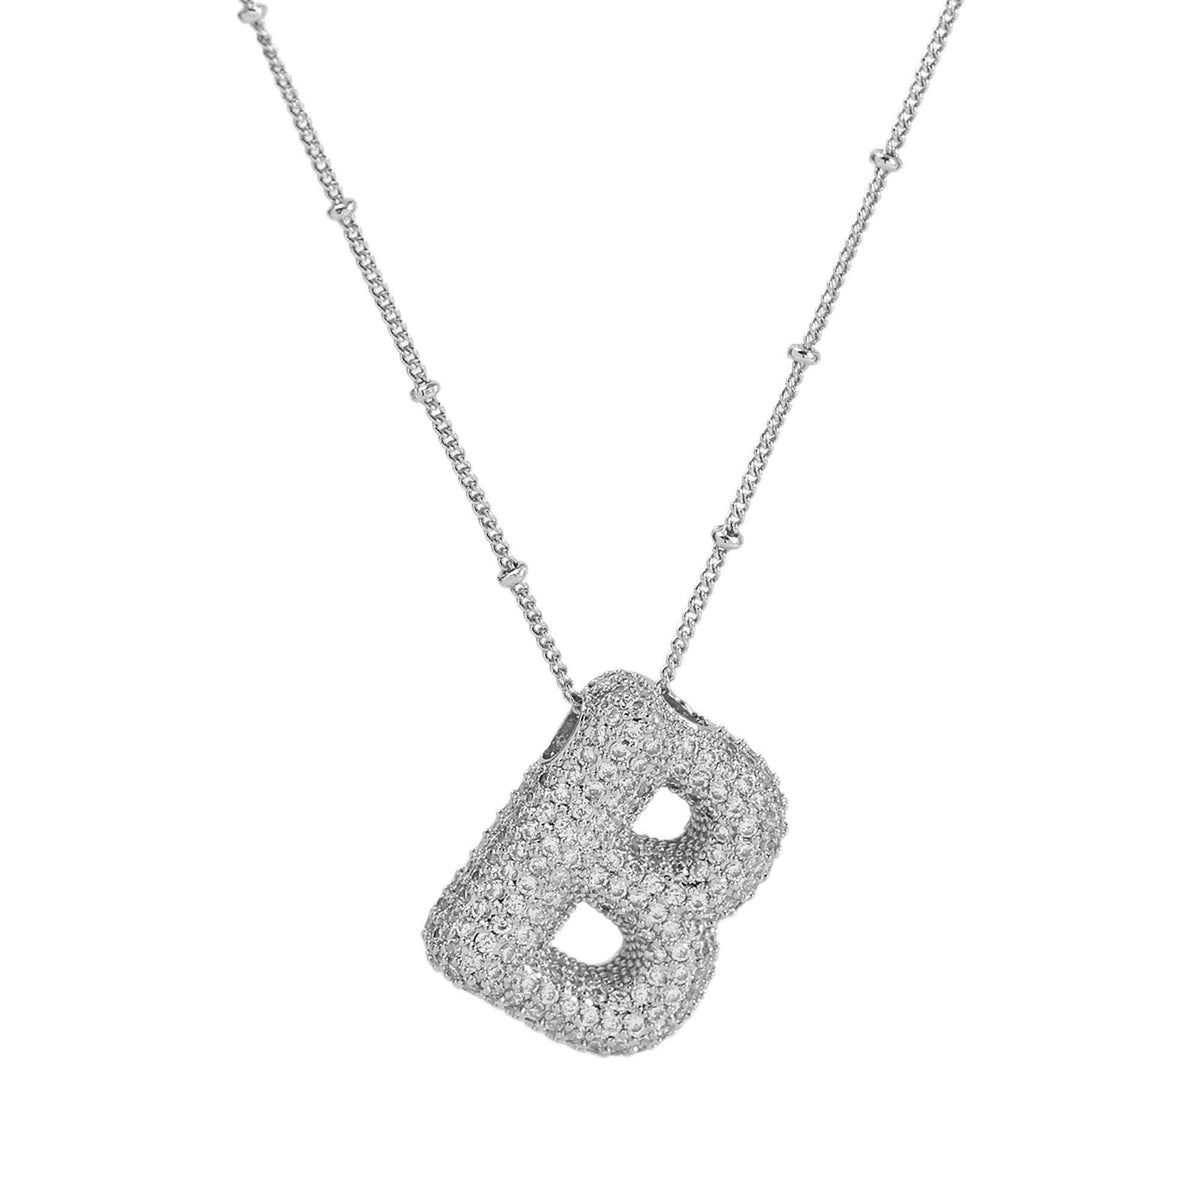 Initial CZ Balloon Bubble Sterling Silver Necklace: C